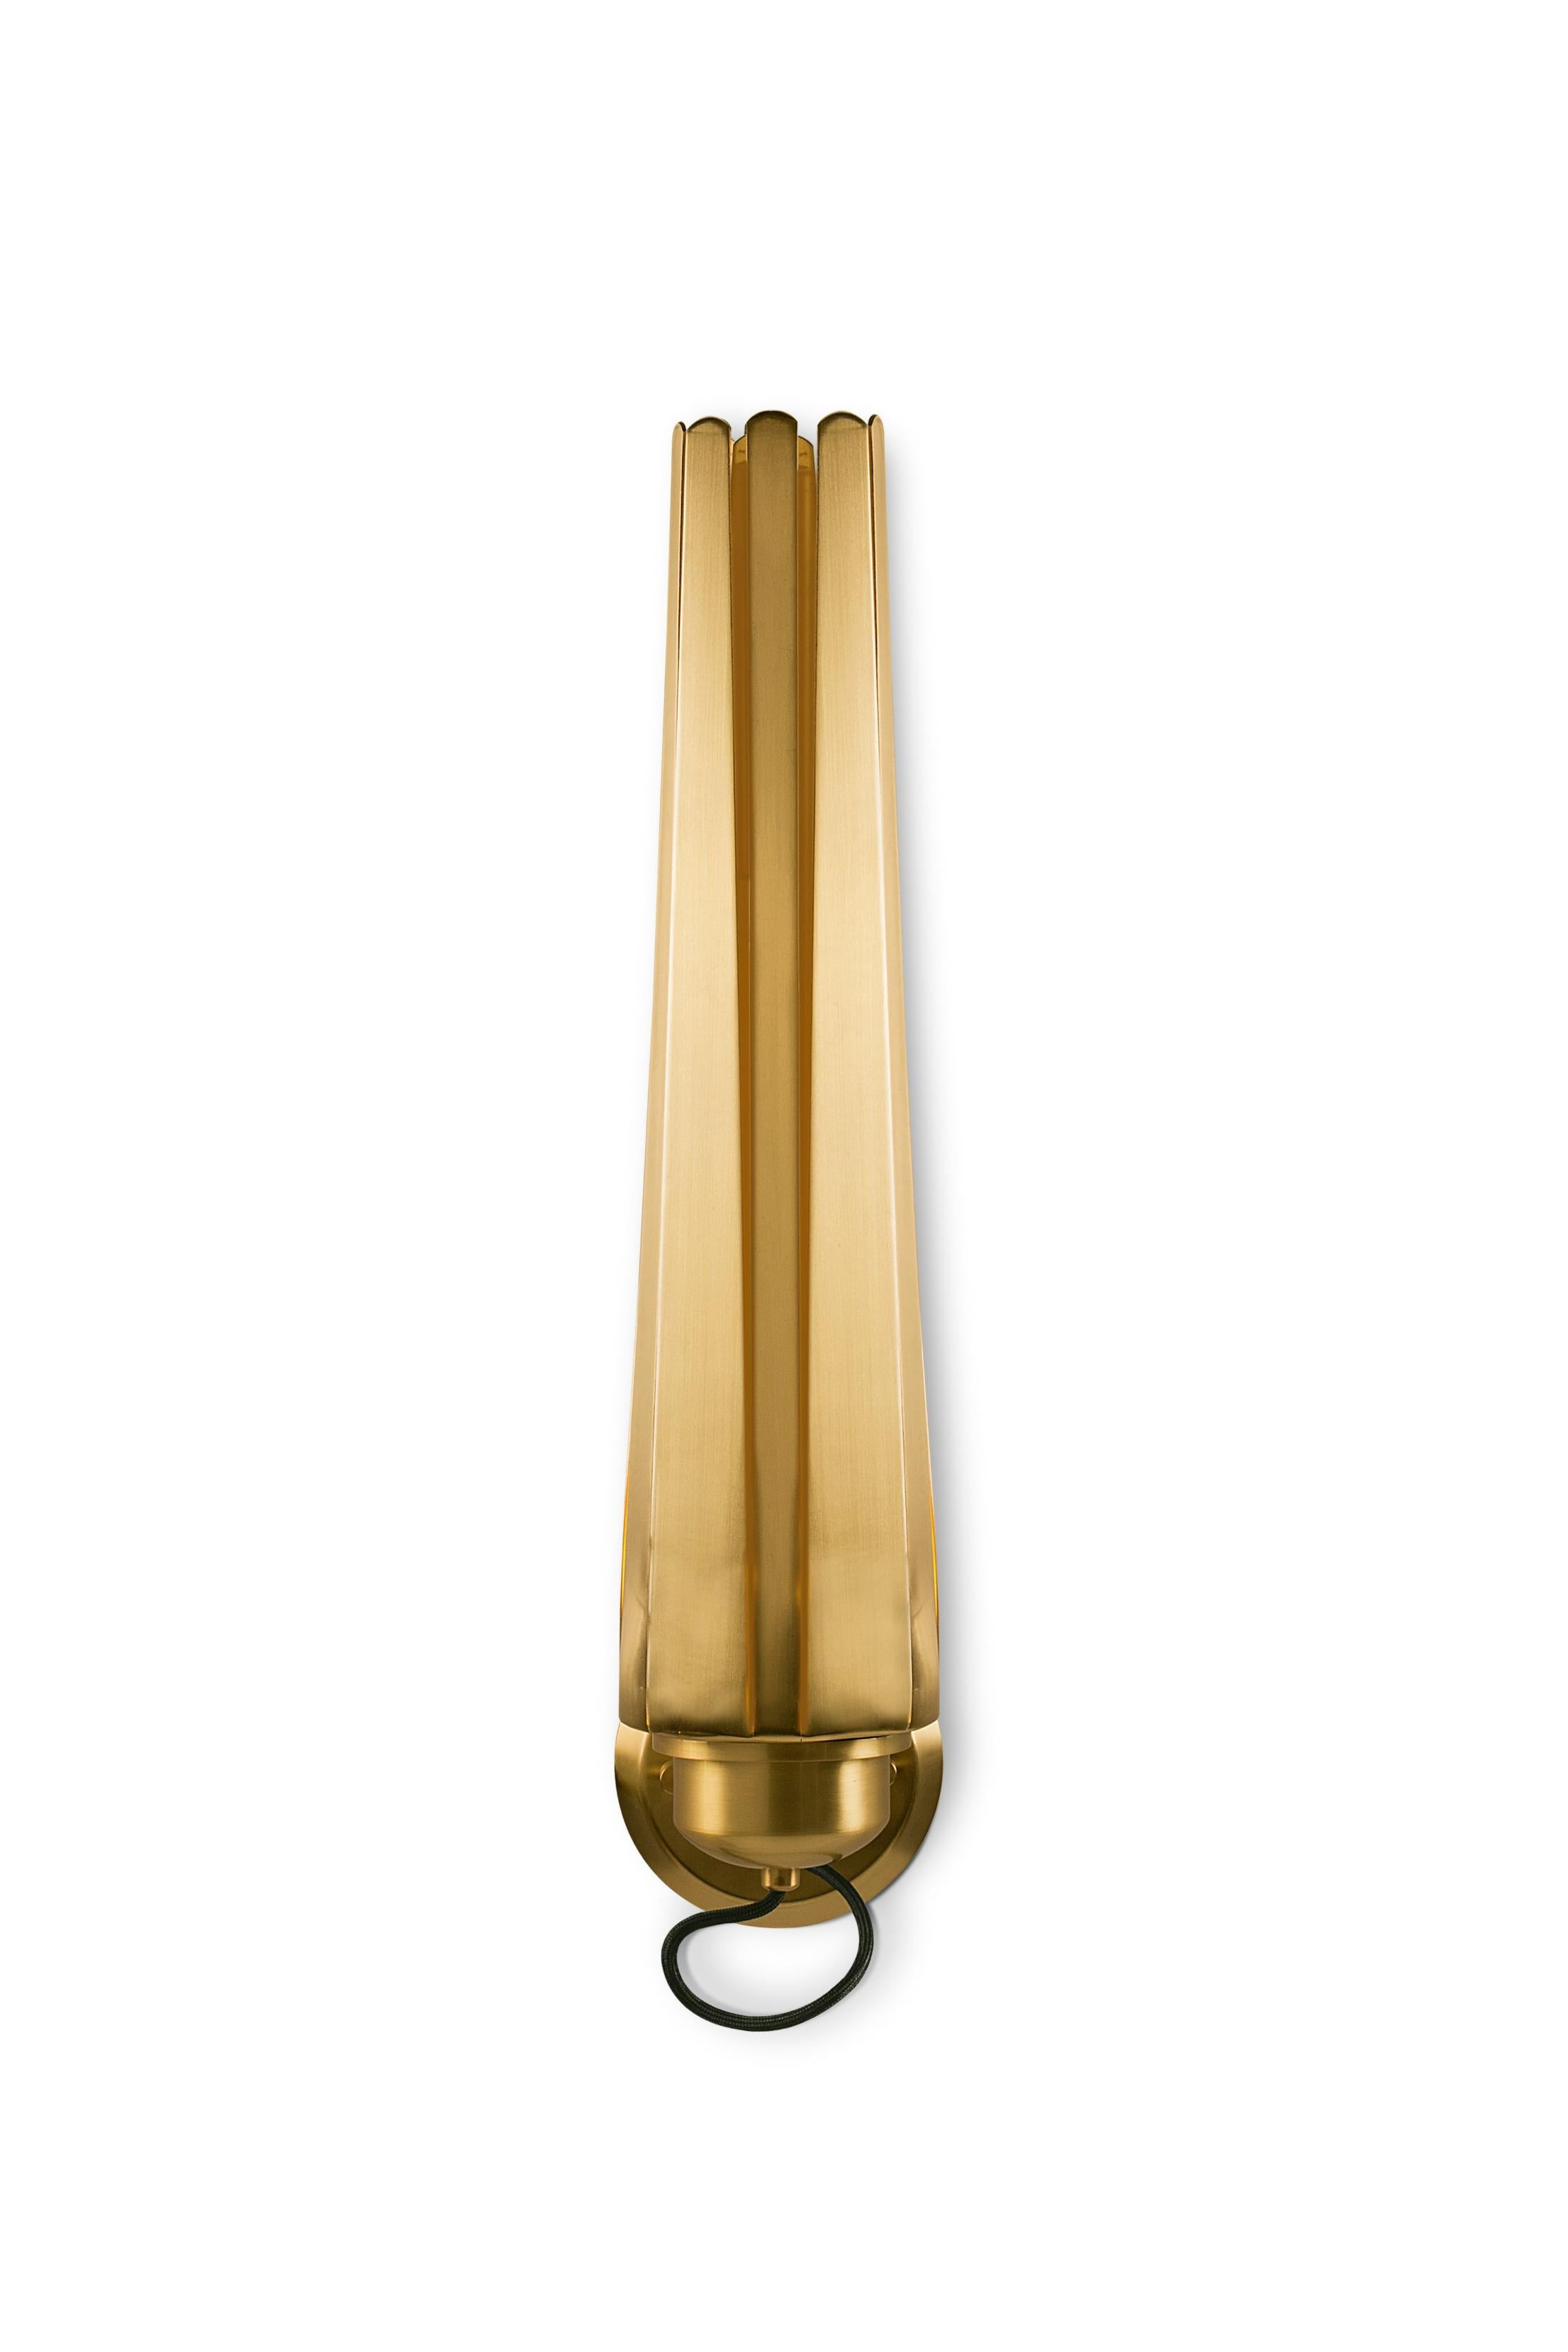 Valkie Sconce in Matte Brass by Brabbu In New Condition For Sale In New York, NY